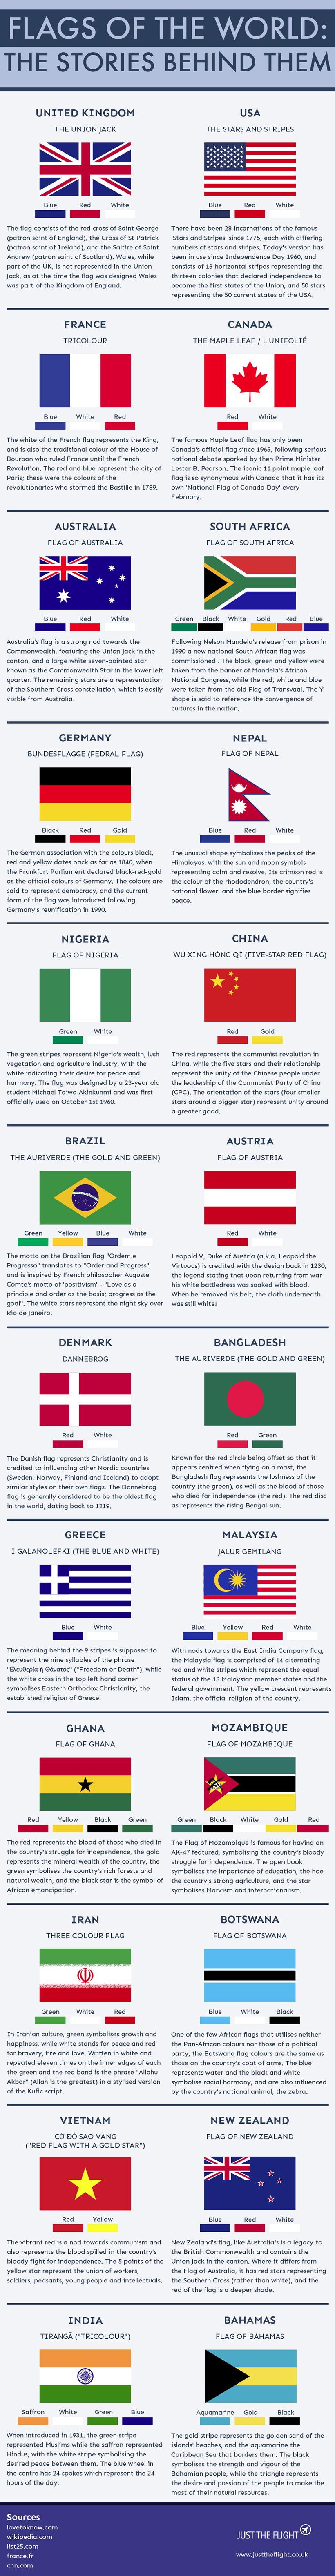 The Visual Meaning Behind 24 of the World's Most Iconic Flags